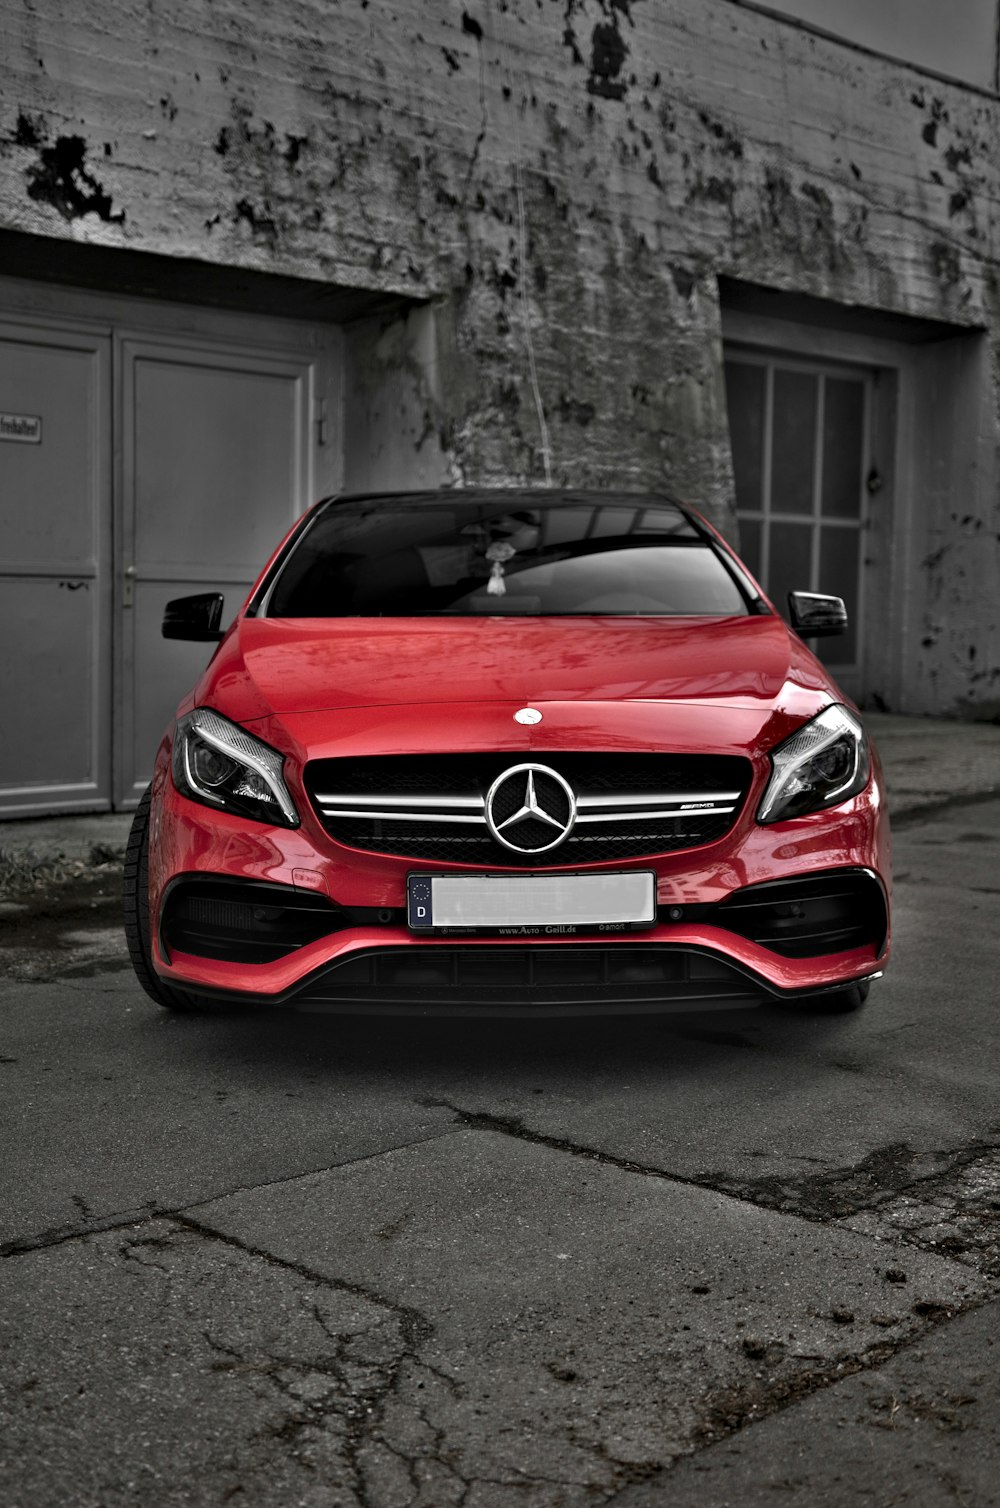 red Mercedes-Benz car on road